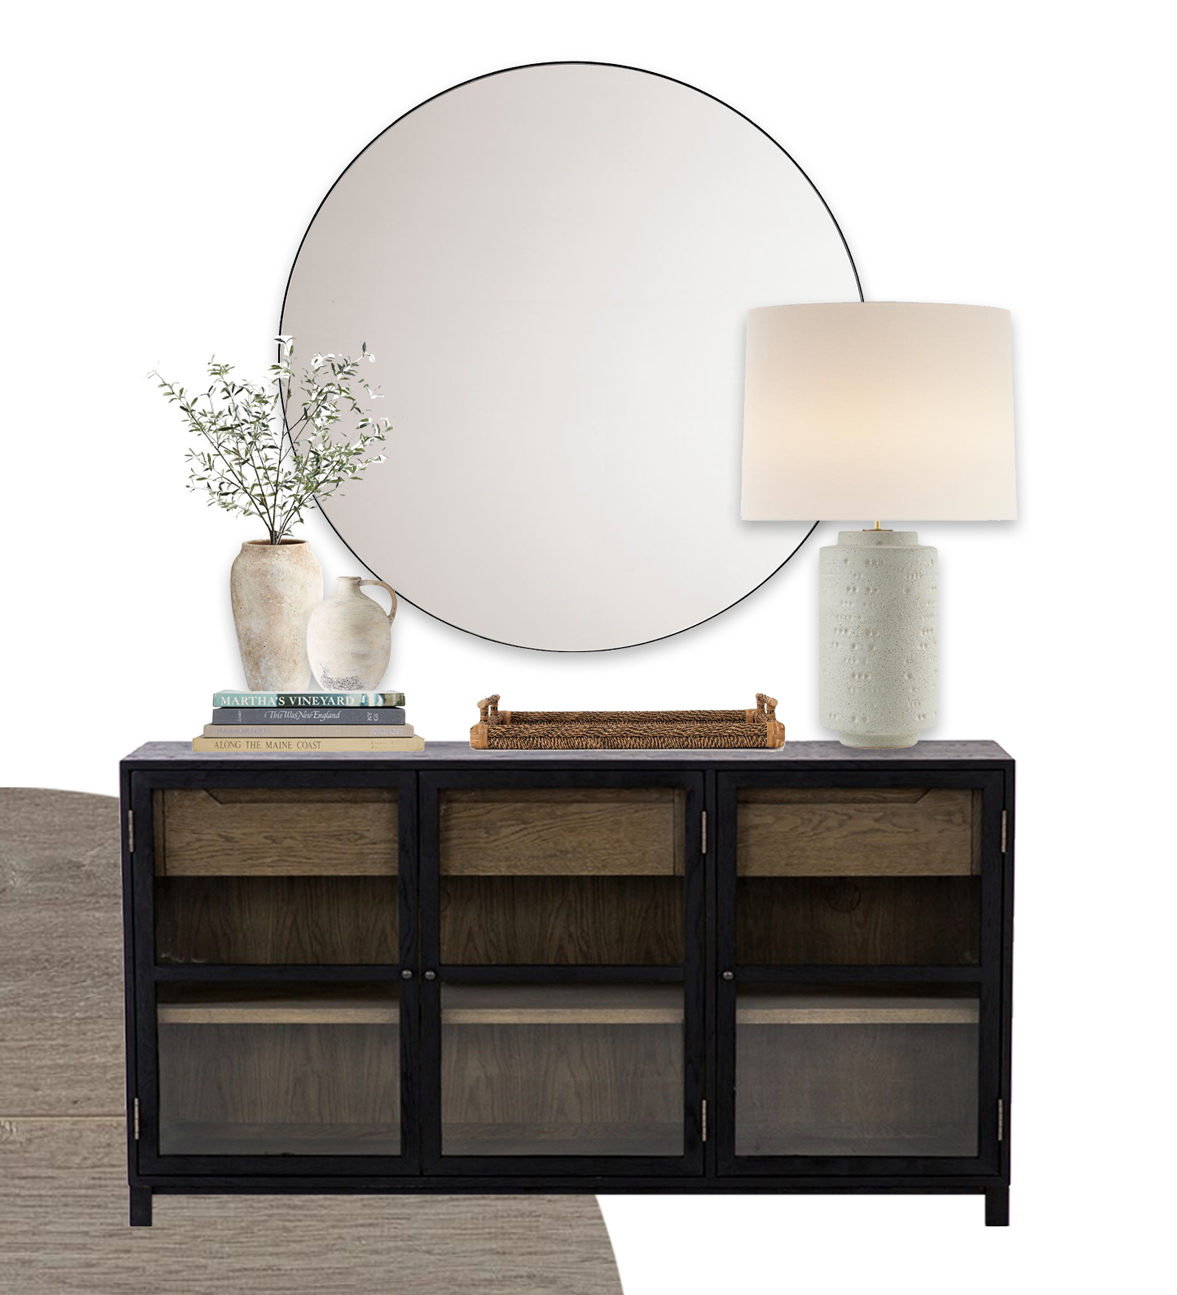 styling dining room sideboard with round mirror above